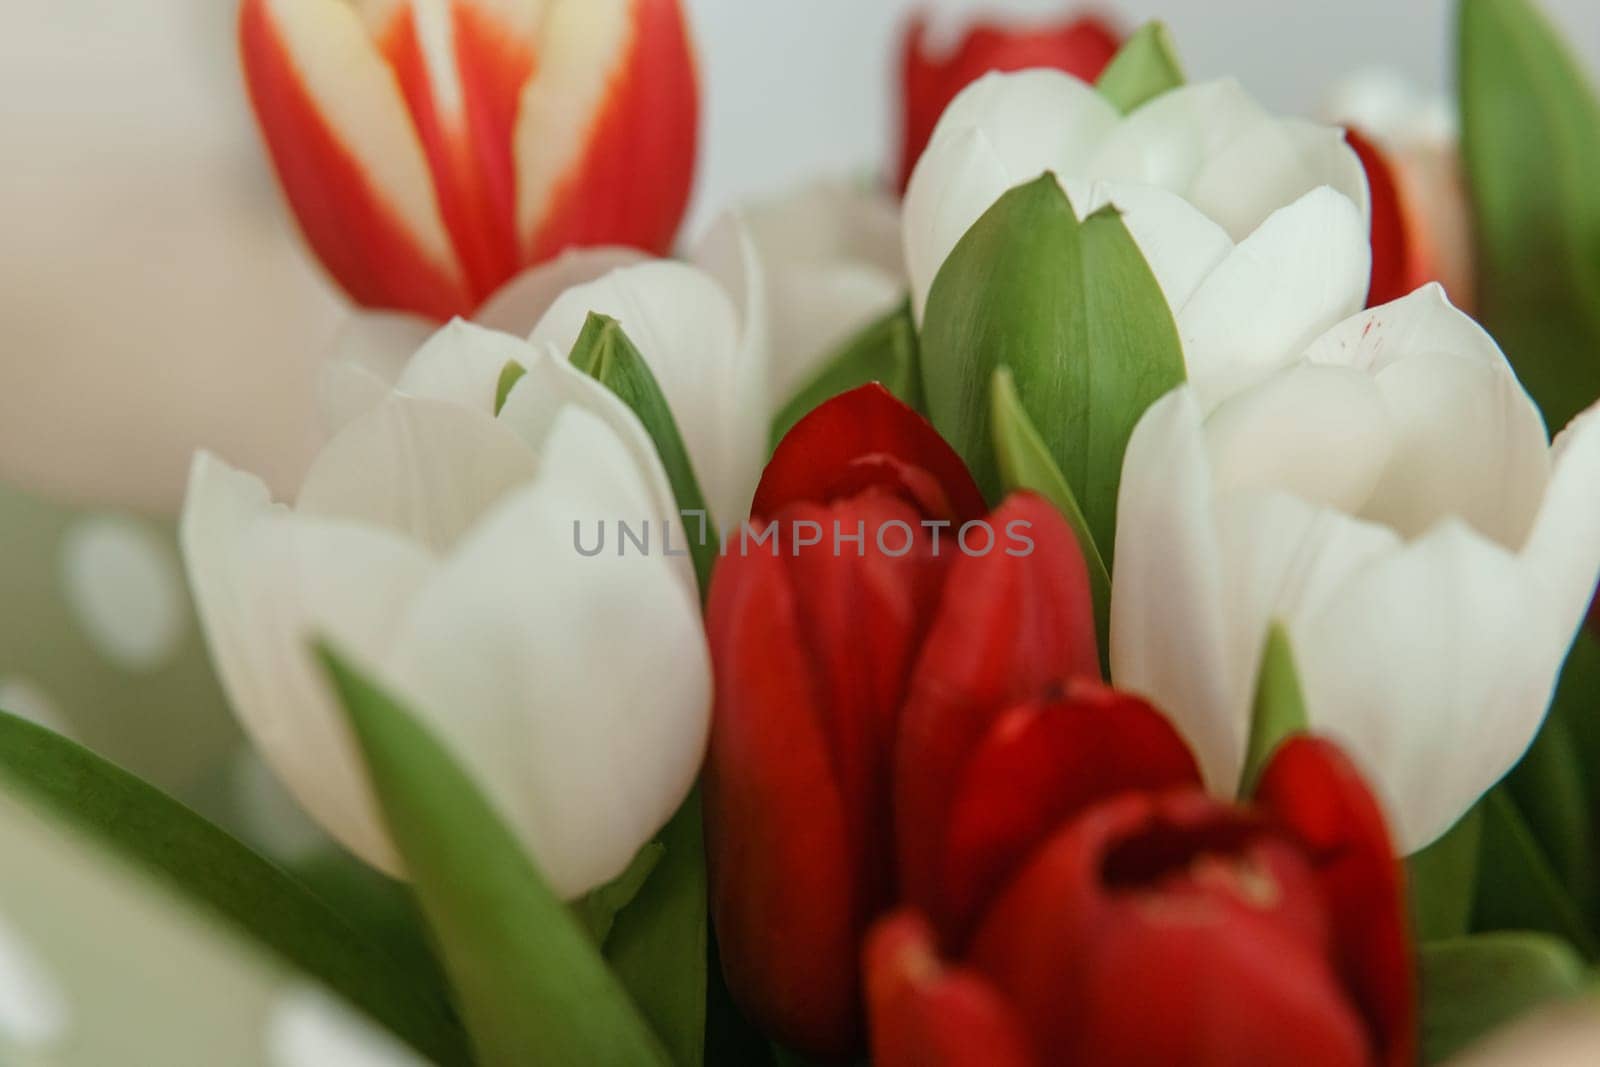 Tender Petals: Tulips Captured in Camera Lens for International Women's Day by Annu1tochka